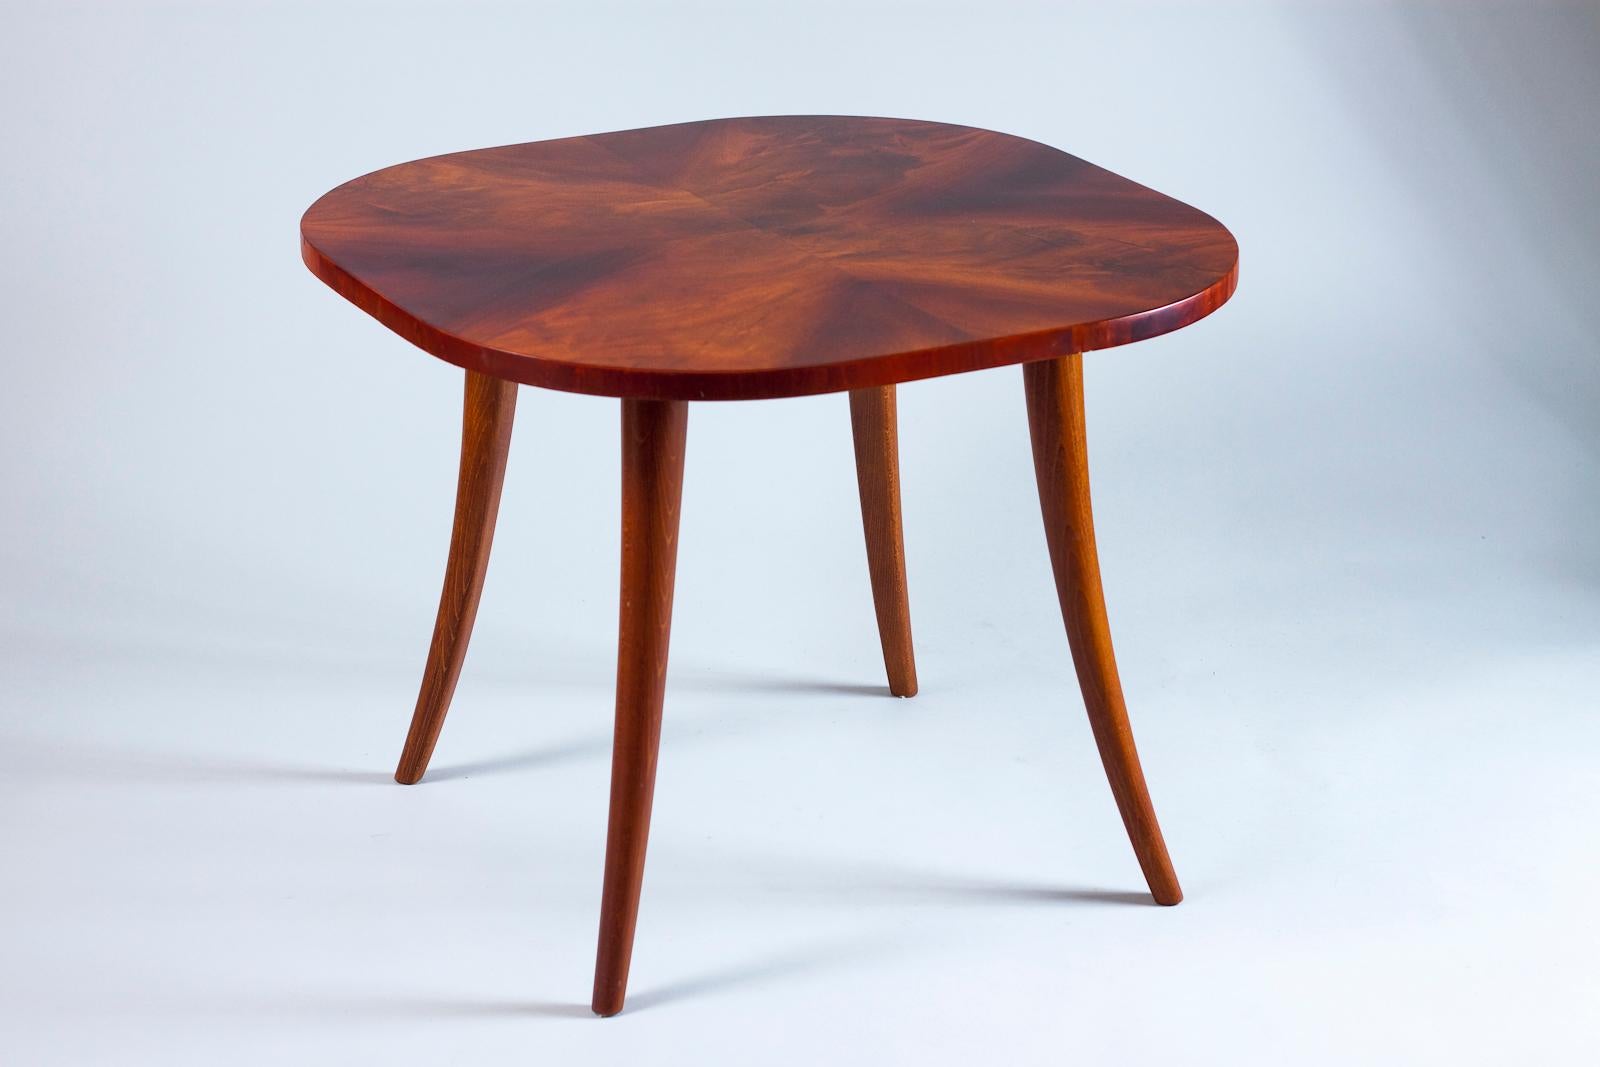 Decorative coffee table in beautiful elm veneer by Gunnel Nyan for OY Boman Ab, FInland. The coffee table id a very rare piece by one of the first woman designers in Finland and Scandinavia.